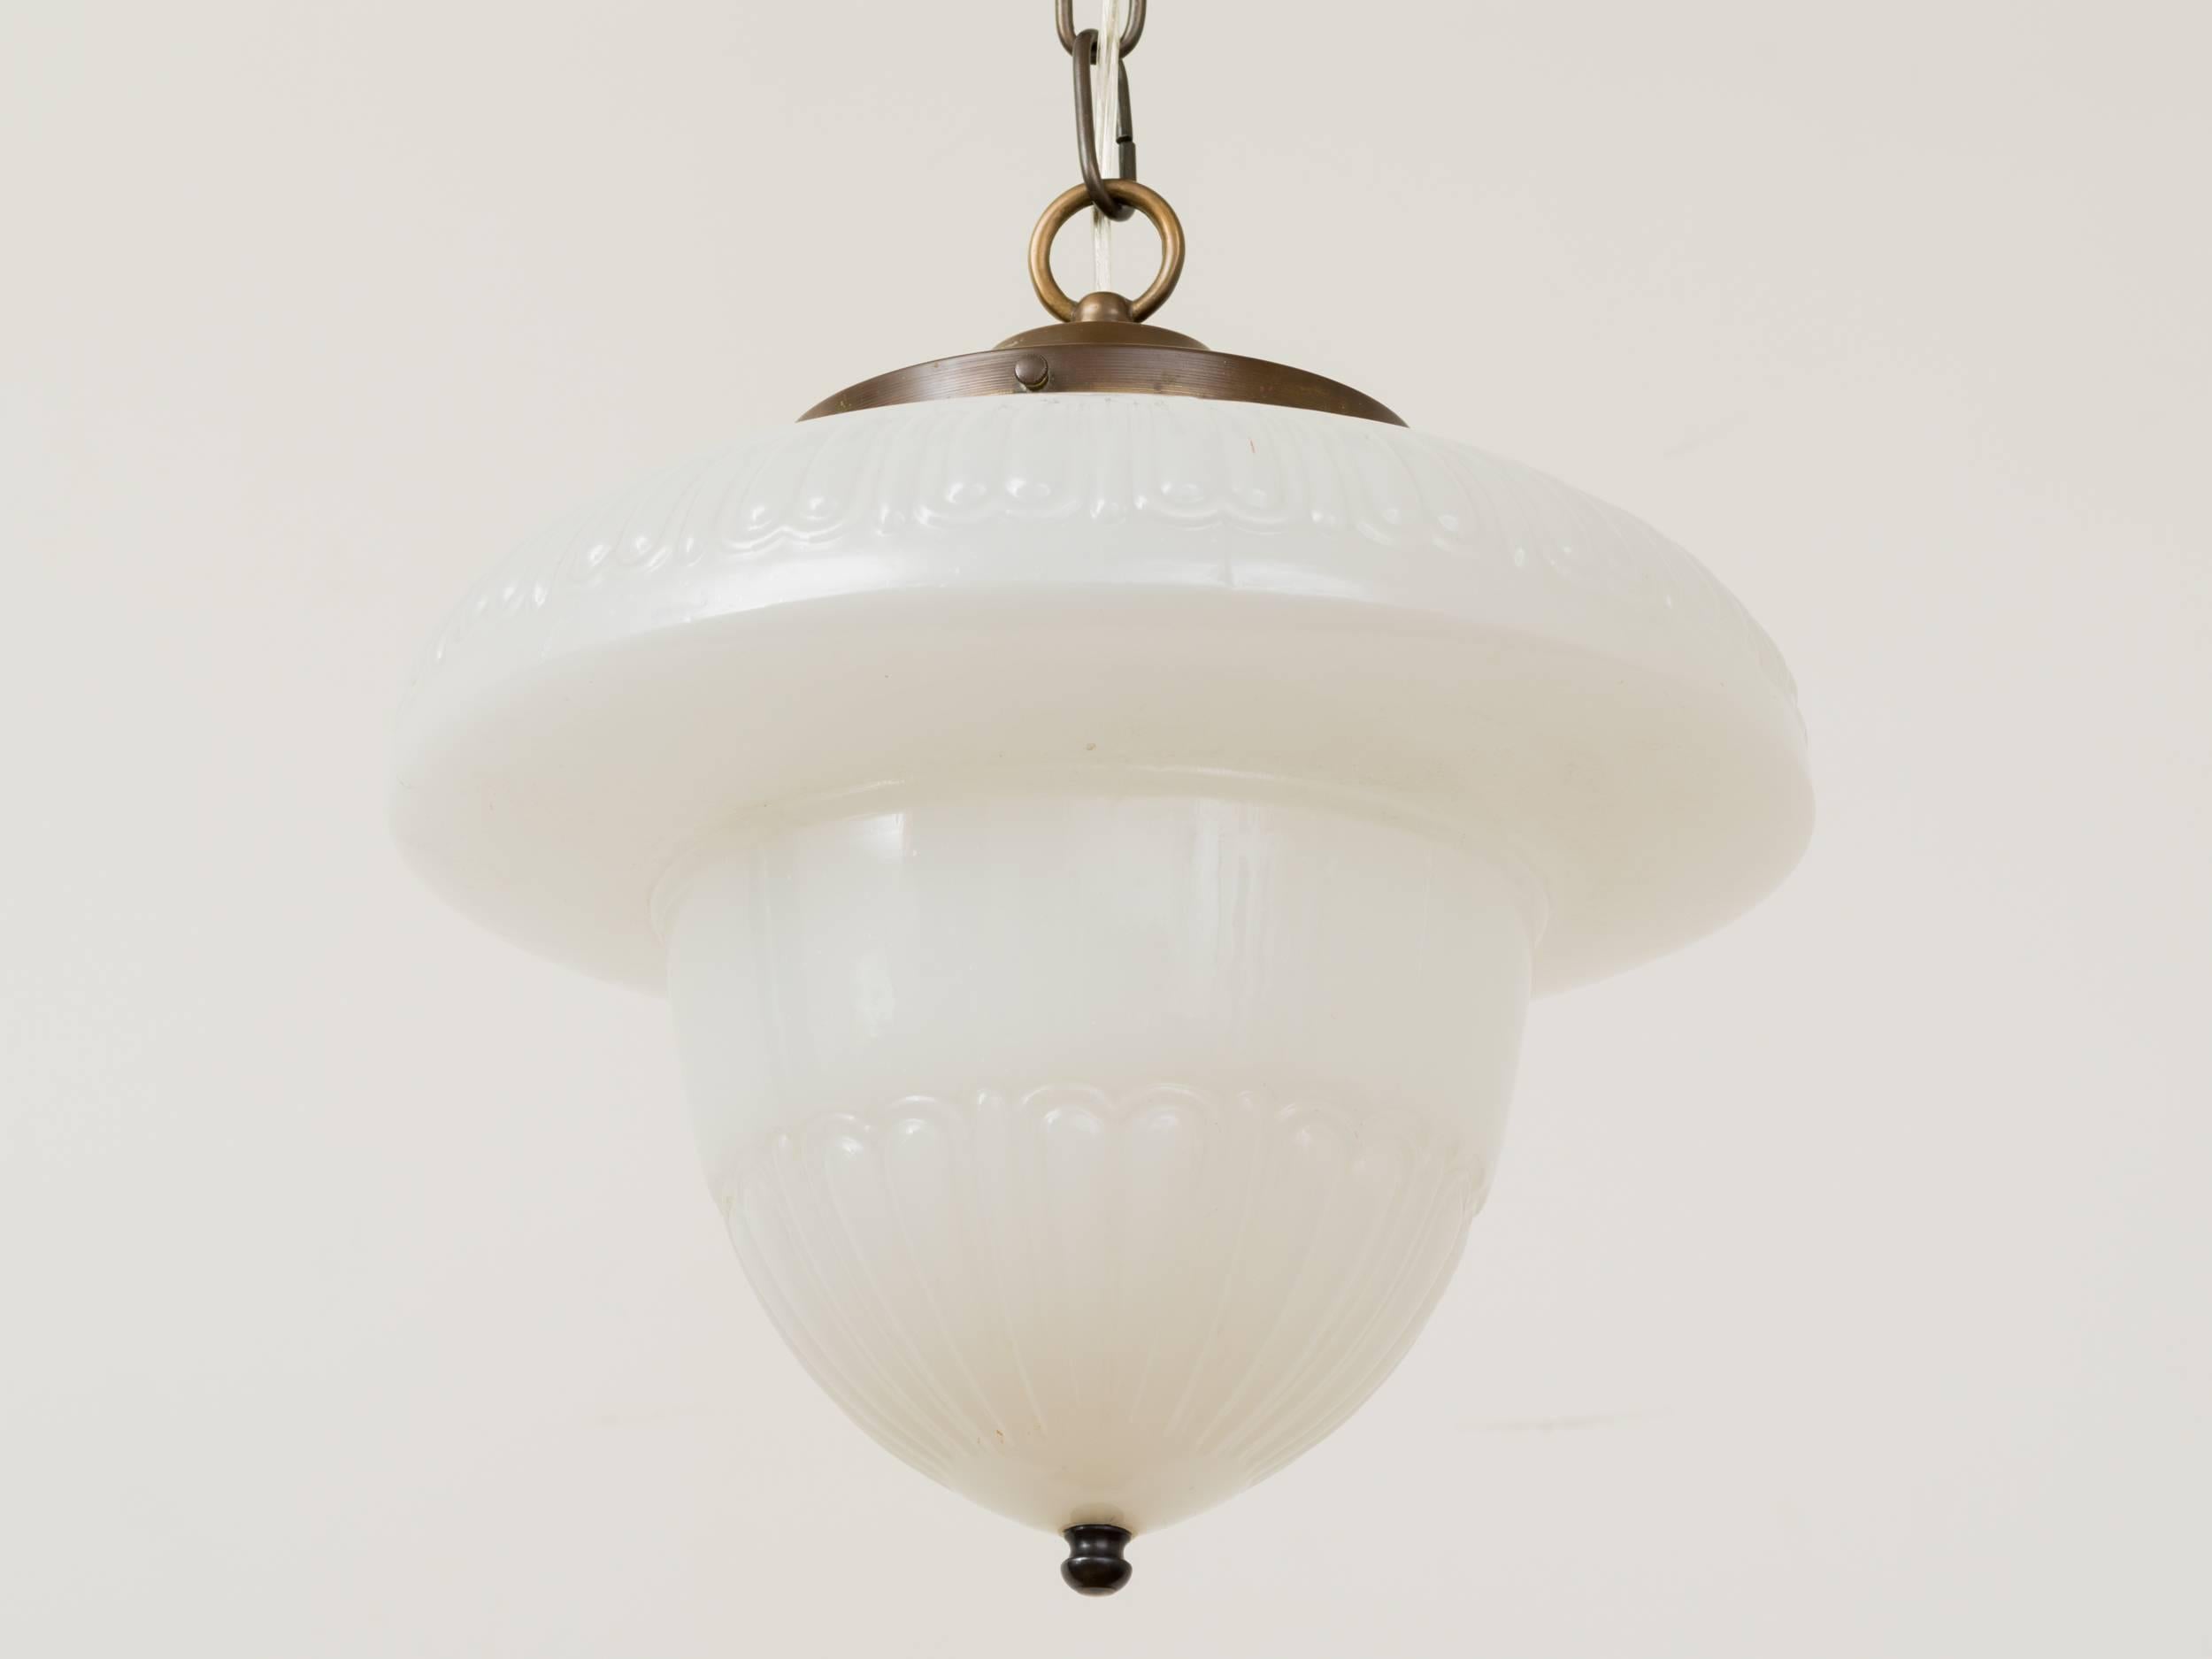 Rare form 1920s milk glass acorn pendant chandelier with brass chain and ceiling cap. Height can be adjusted by adding a longer chain.